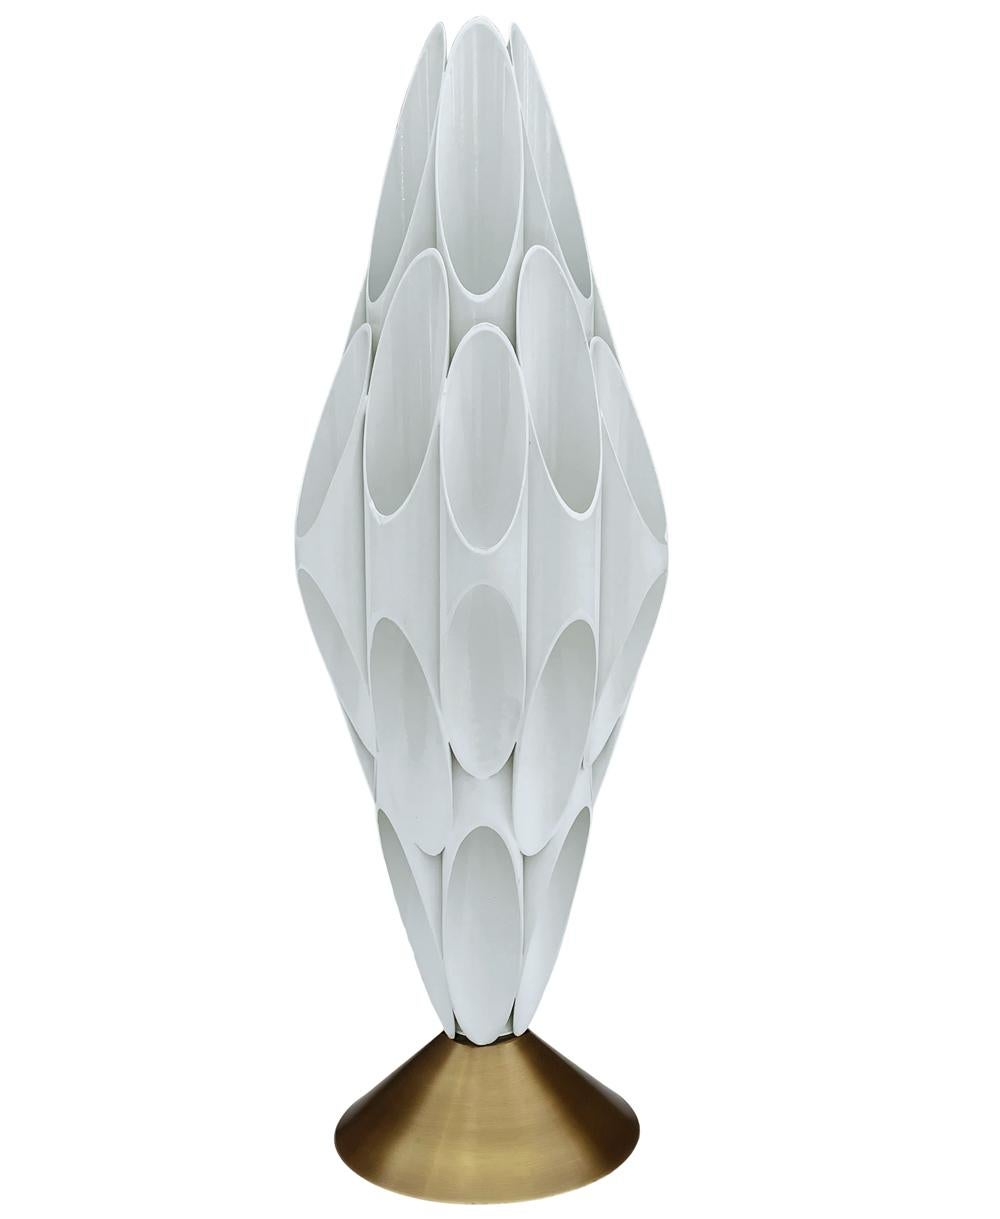 Mid-Century Modern Tubular Table Sculpture Lamp in Brass & White After Rougier For Sale 1